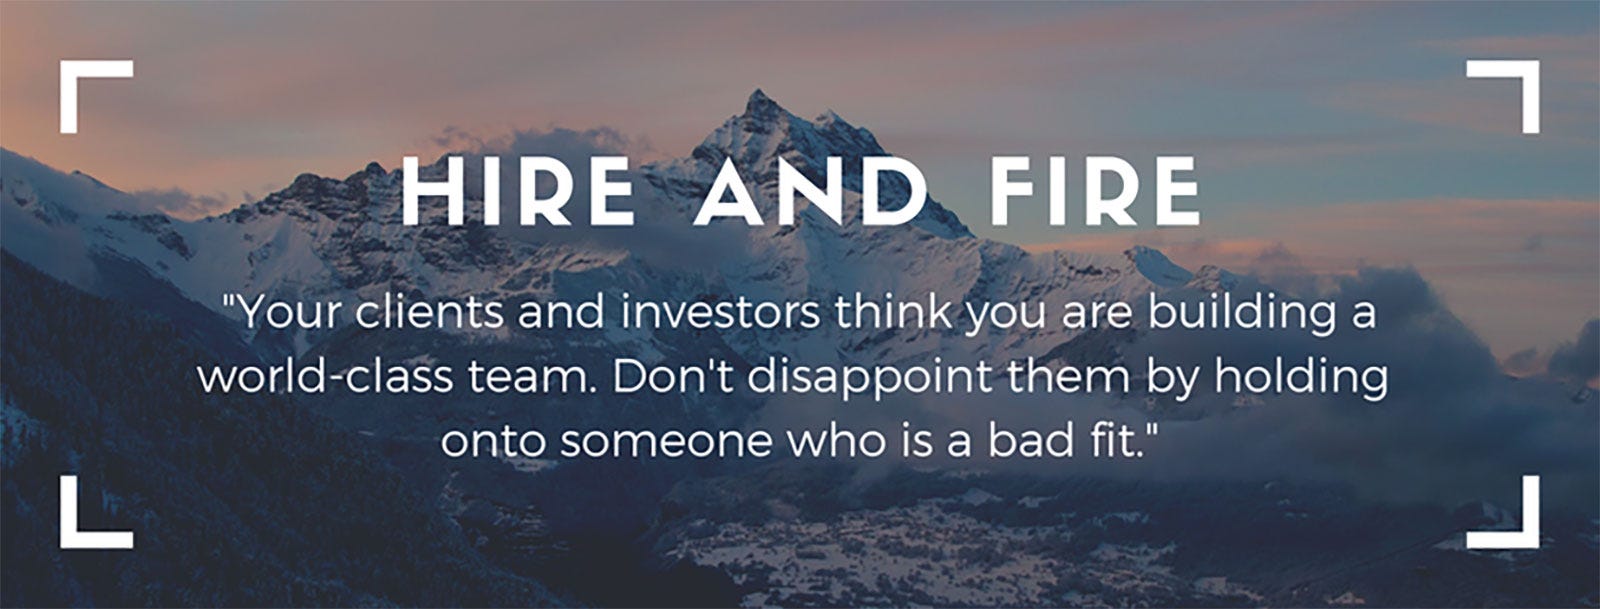 Hire and Fire: “Your clients and investors think you are building a world-class team. Don’t disappoint them by holding onto someone who is a bad fit.”